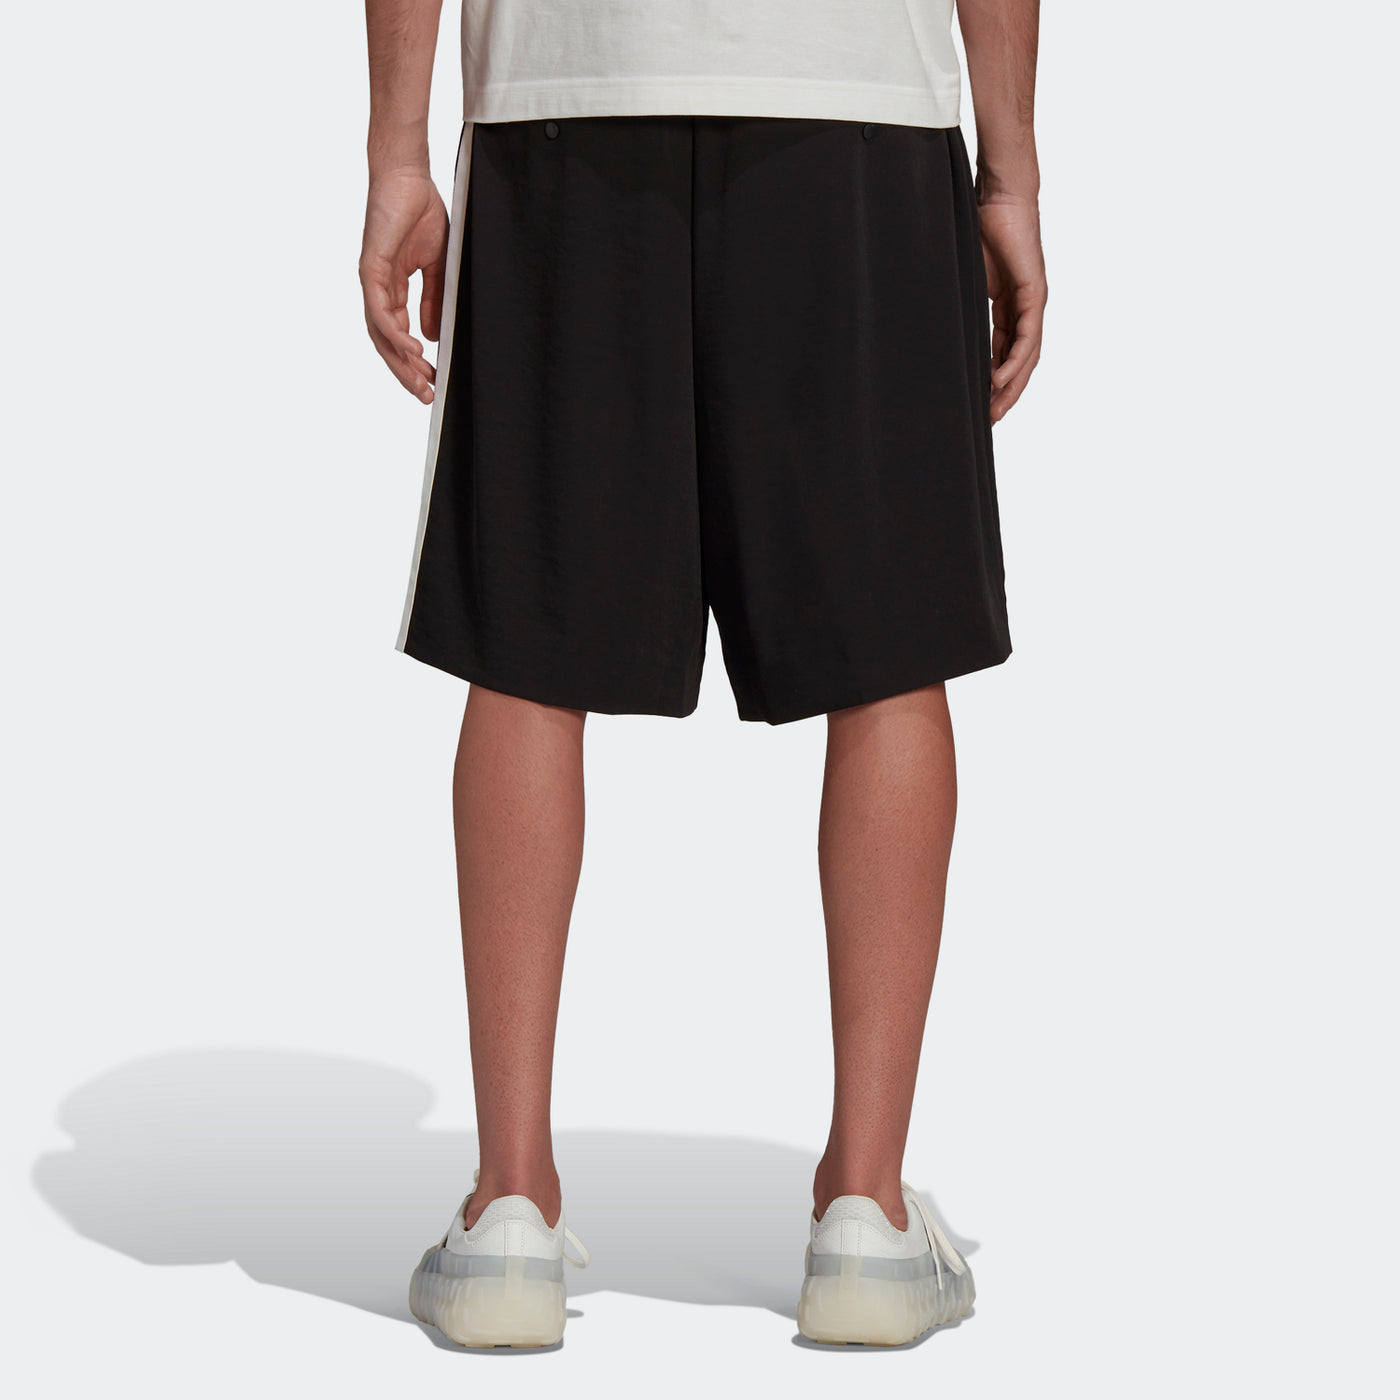 M CH1 ELEGANT 3 STP SHORTS - SHORT LENGTH - Why are you here?